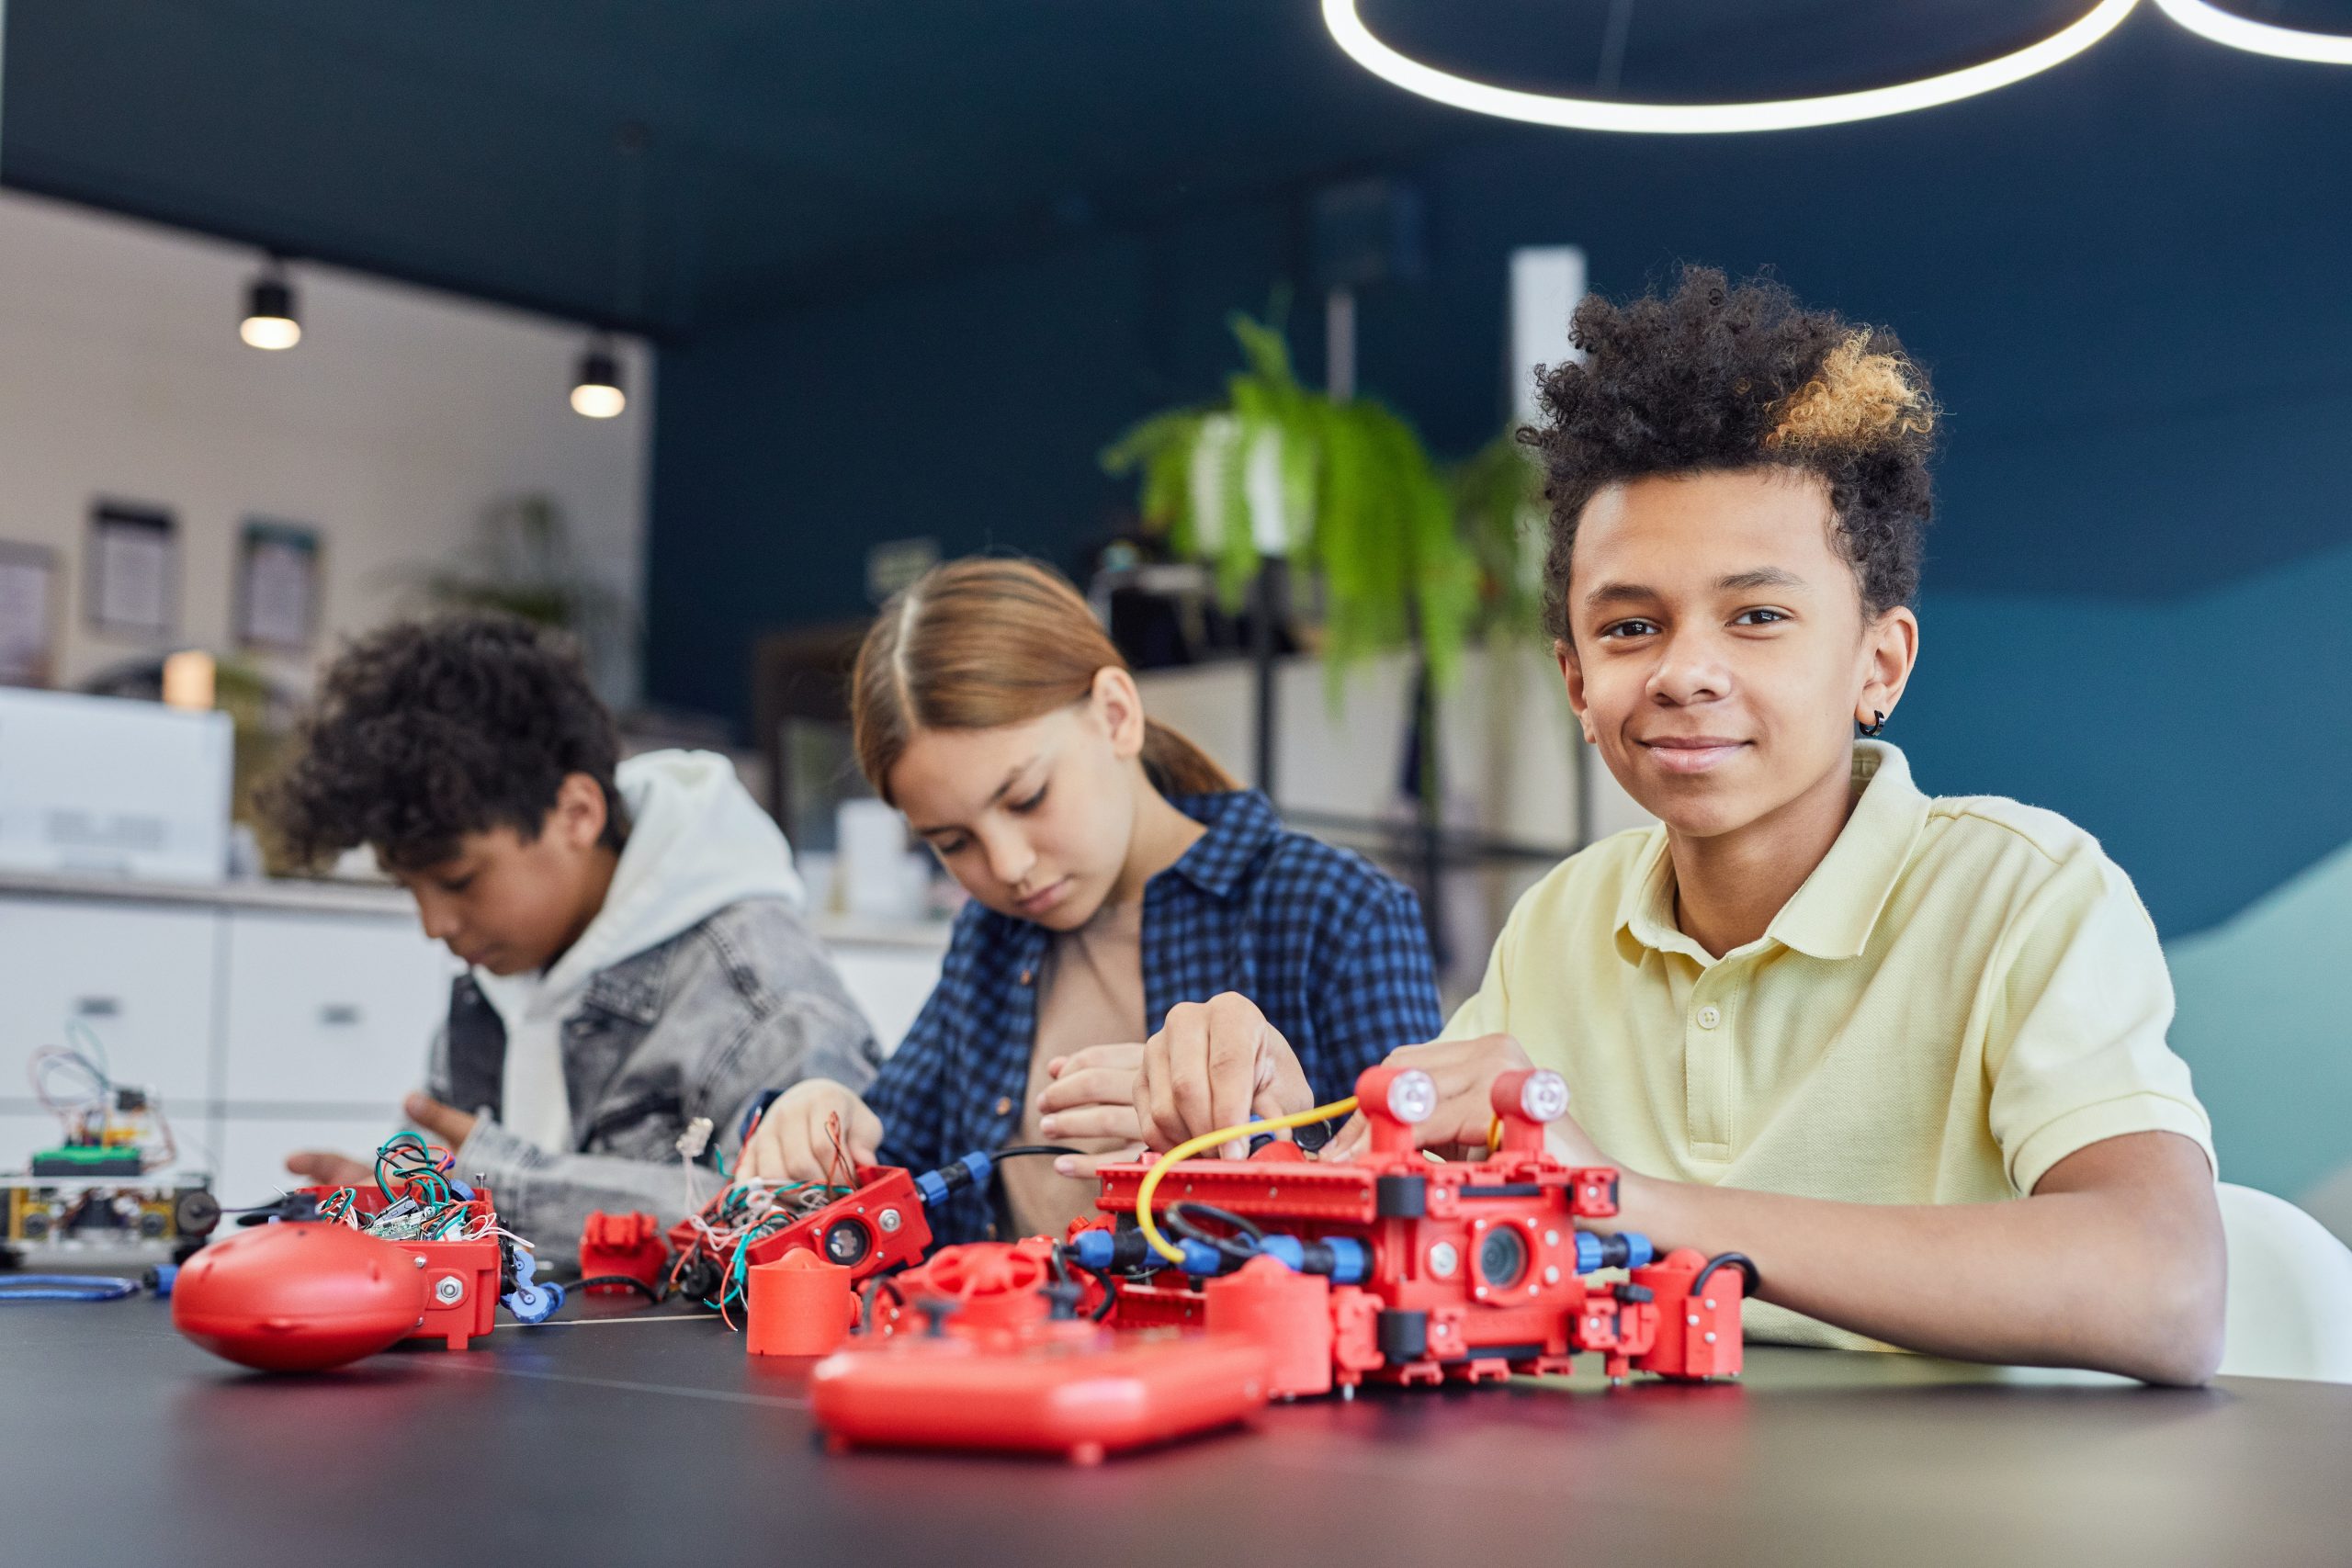 What skills do today’s kids need for the jobs of the future?